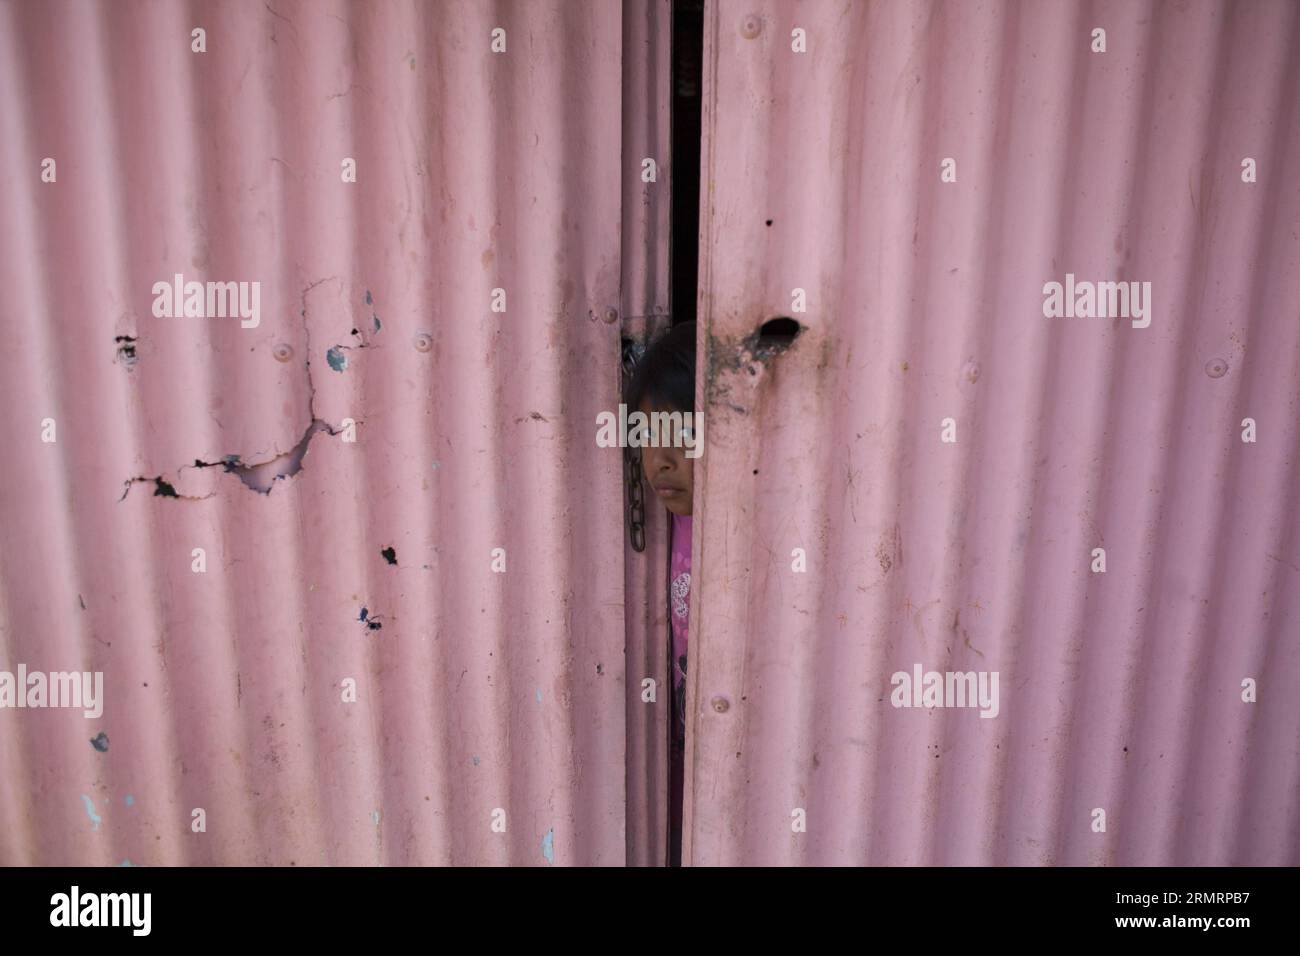 GUATEMALA CITY, July 30, 2014 -- A girl peeks from her house during an eviction conducted by the National Civil Police of Guatemala, in the settlement Linda Vista, in Guatemala City, capital of Guatemala, on July 30, 2014. Approximately 150 families from the Linda Vista settlement were evicted from the lands they have occupied for the last 18 months. ) (jp) (ah) GUATEMALA-GUATEMALA CITY-SOCIETY-EVICTION LuisxEcheverria PUBLICATIONxNOTxINxCHN   Guatemala City July 30 2014 a Girl Peeks from her House during to Eviction conducted by The National Civil Police of Guatemala in The Settlement Linda V Stock Photo